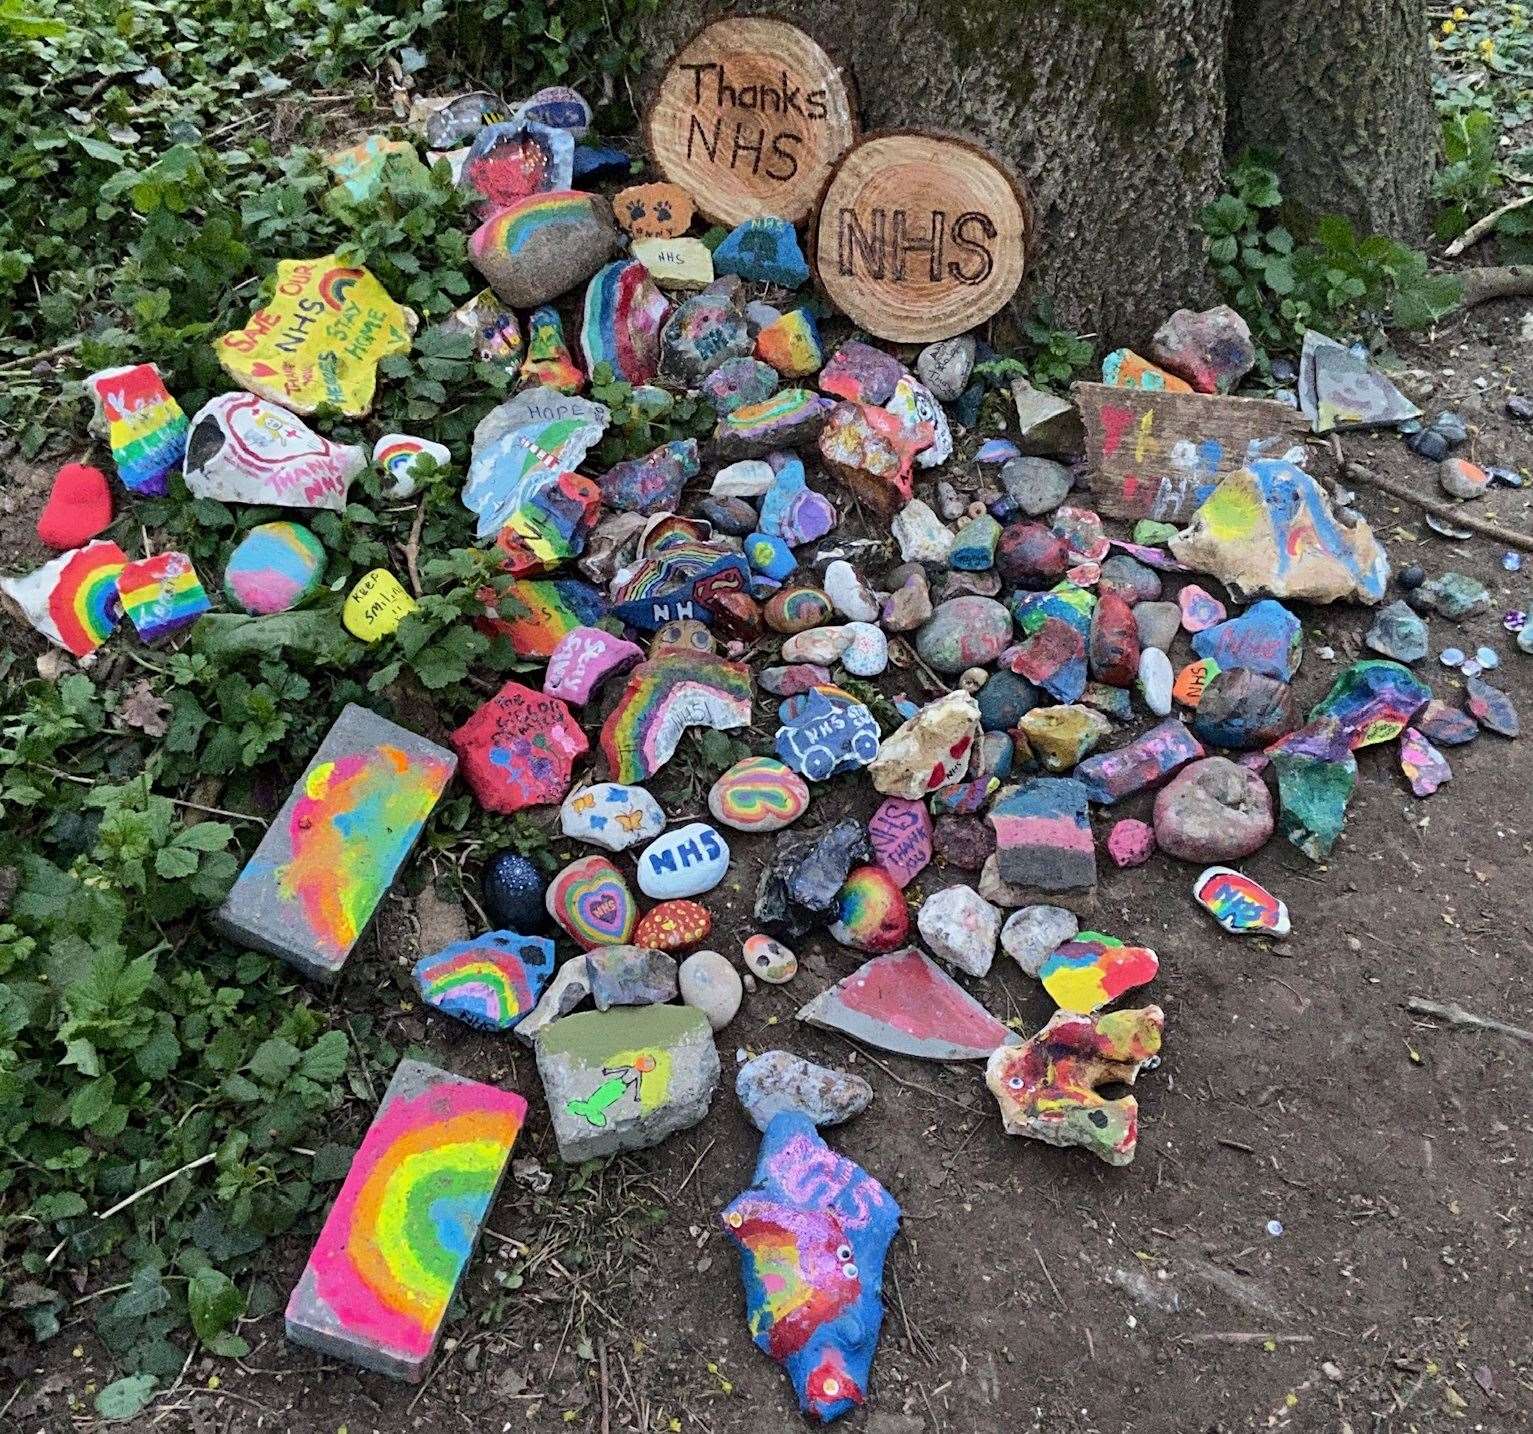 The painted pebbles supporting the NHS by Logan's tree in Taddington Wood, Chatham